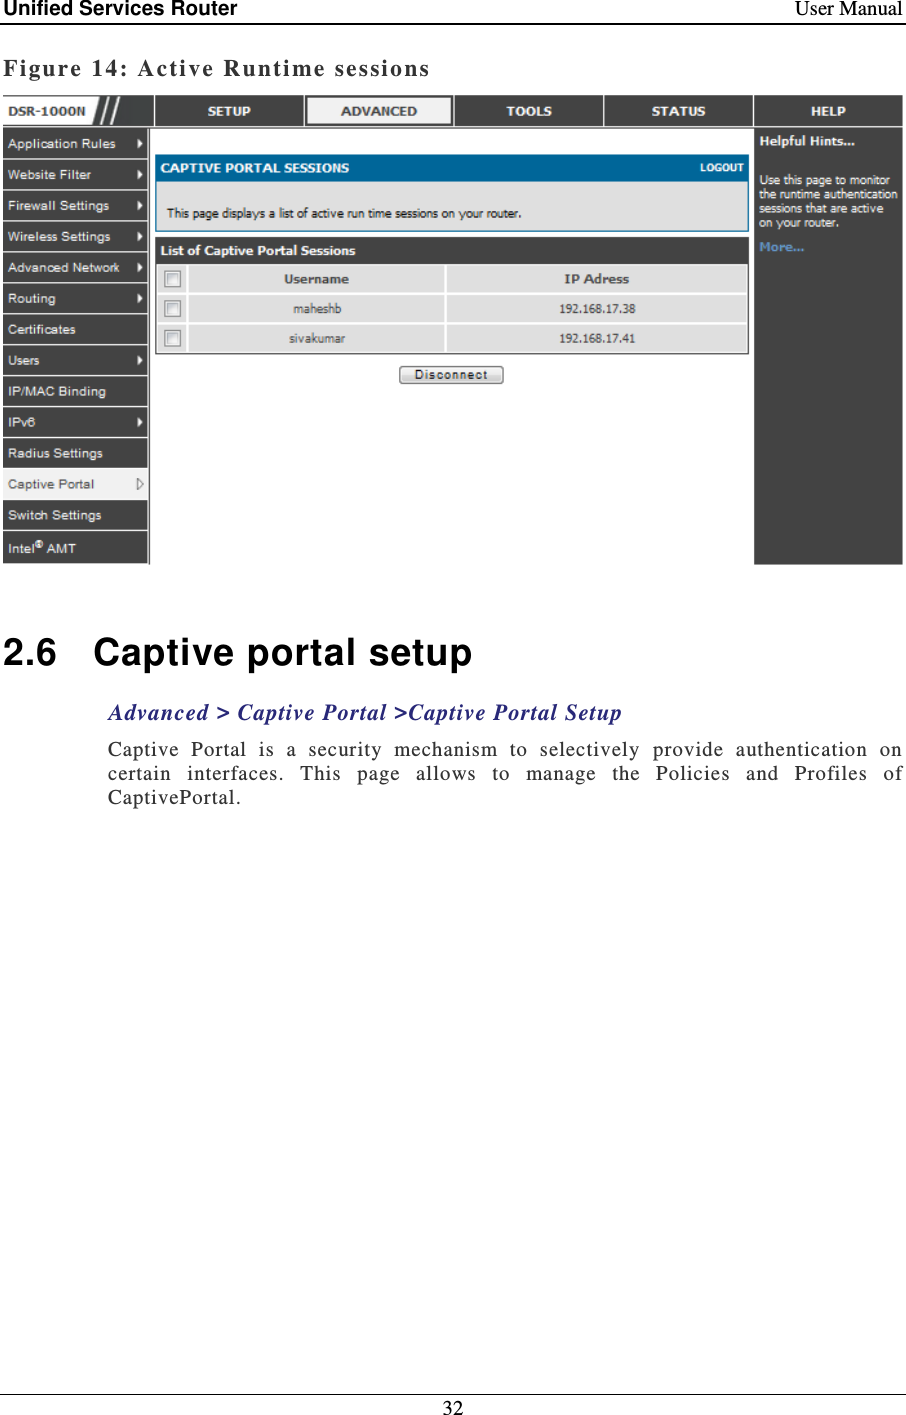 Unified Services Router    User Manual 32  Figure 14: Active Runtime sessio ns    2.6  Captive portal setup Advanced &gt; Captive Portal &gt;Captive Portal Setup Captive  Portal  is  a  security  mechanism  to  selectively  provide  authentication  on certain  interfaces.  This  page  allows  to  manage  the  Policies  and  Profiles  of CaptivePortal.     